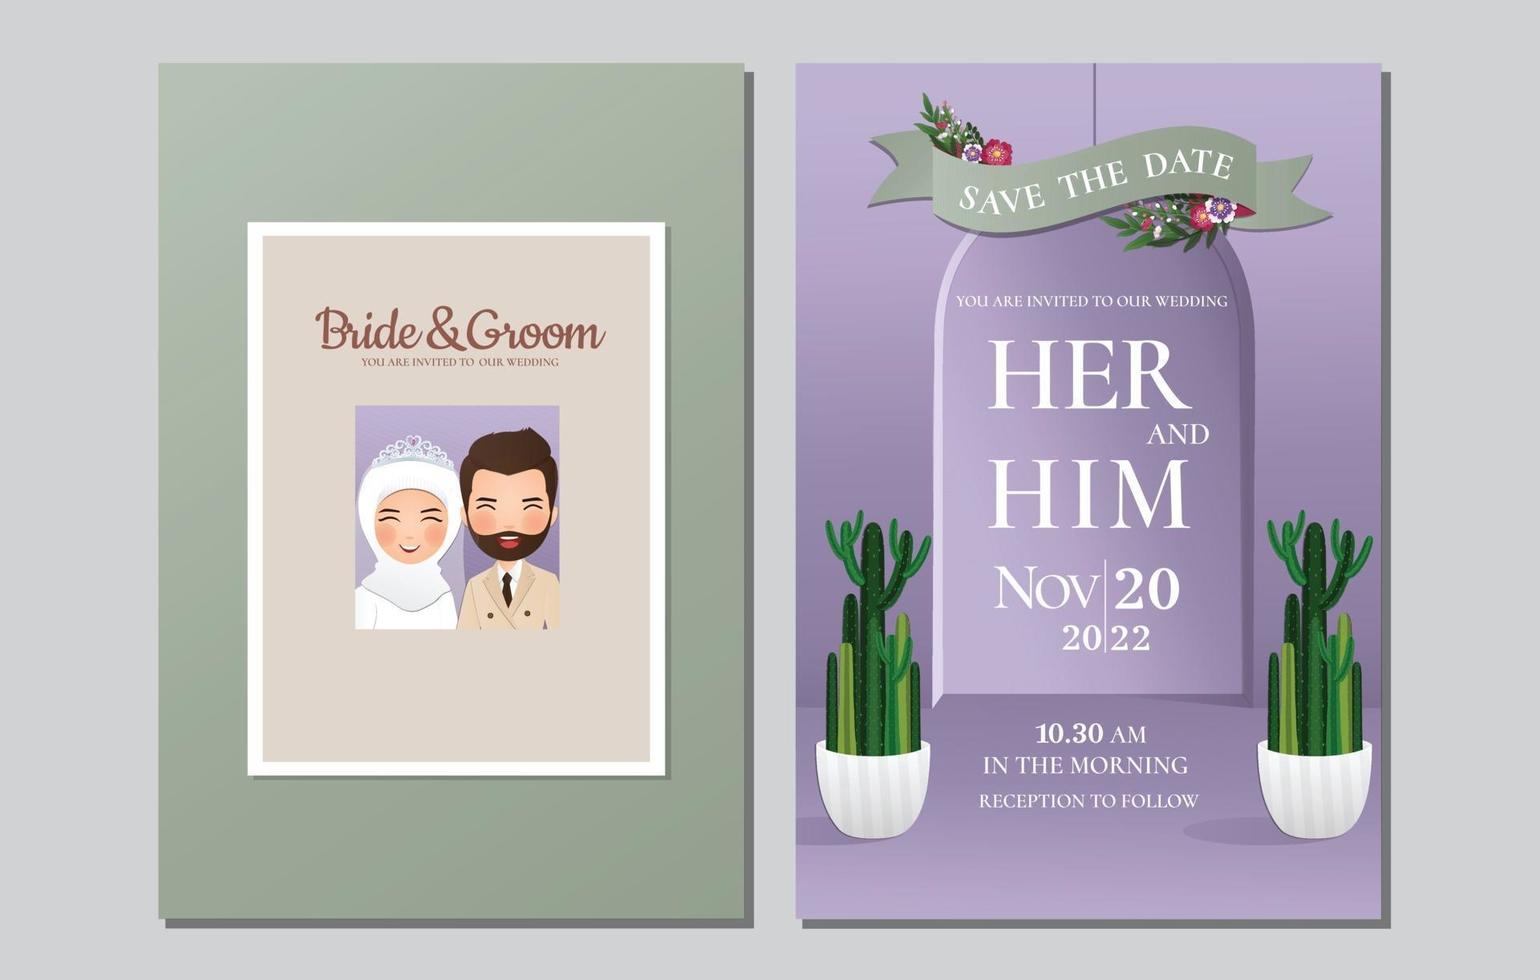 Wedding invitation card the bride and groom cute muslim couple cartoon character with green cactus vector